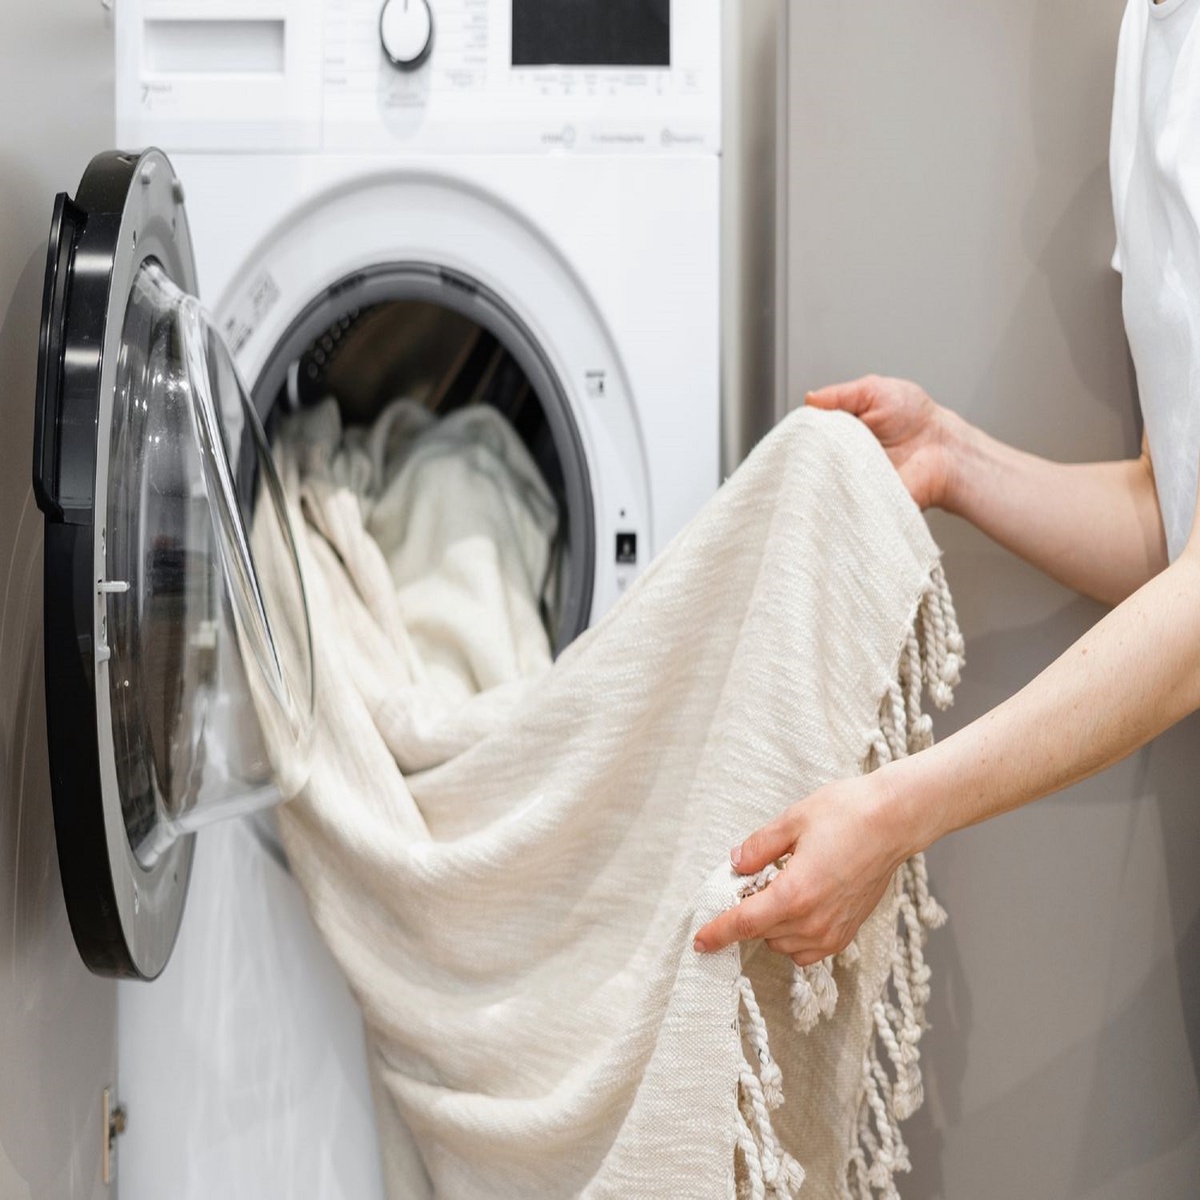 The Art and Science of Laundry: Transforming the Mundane into the Meaningful